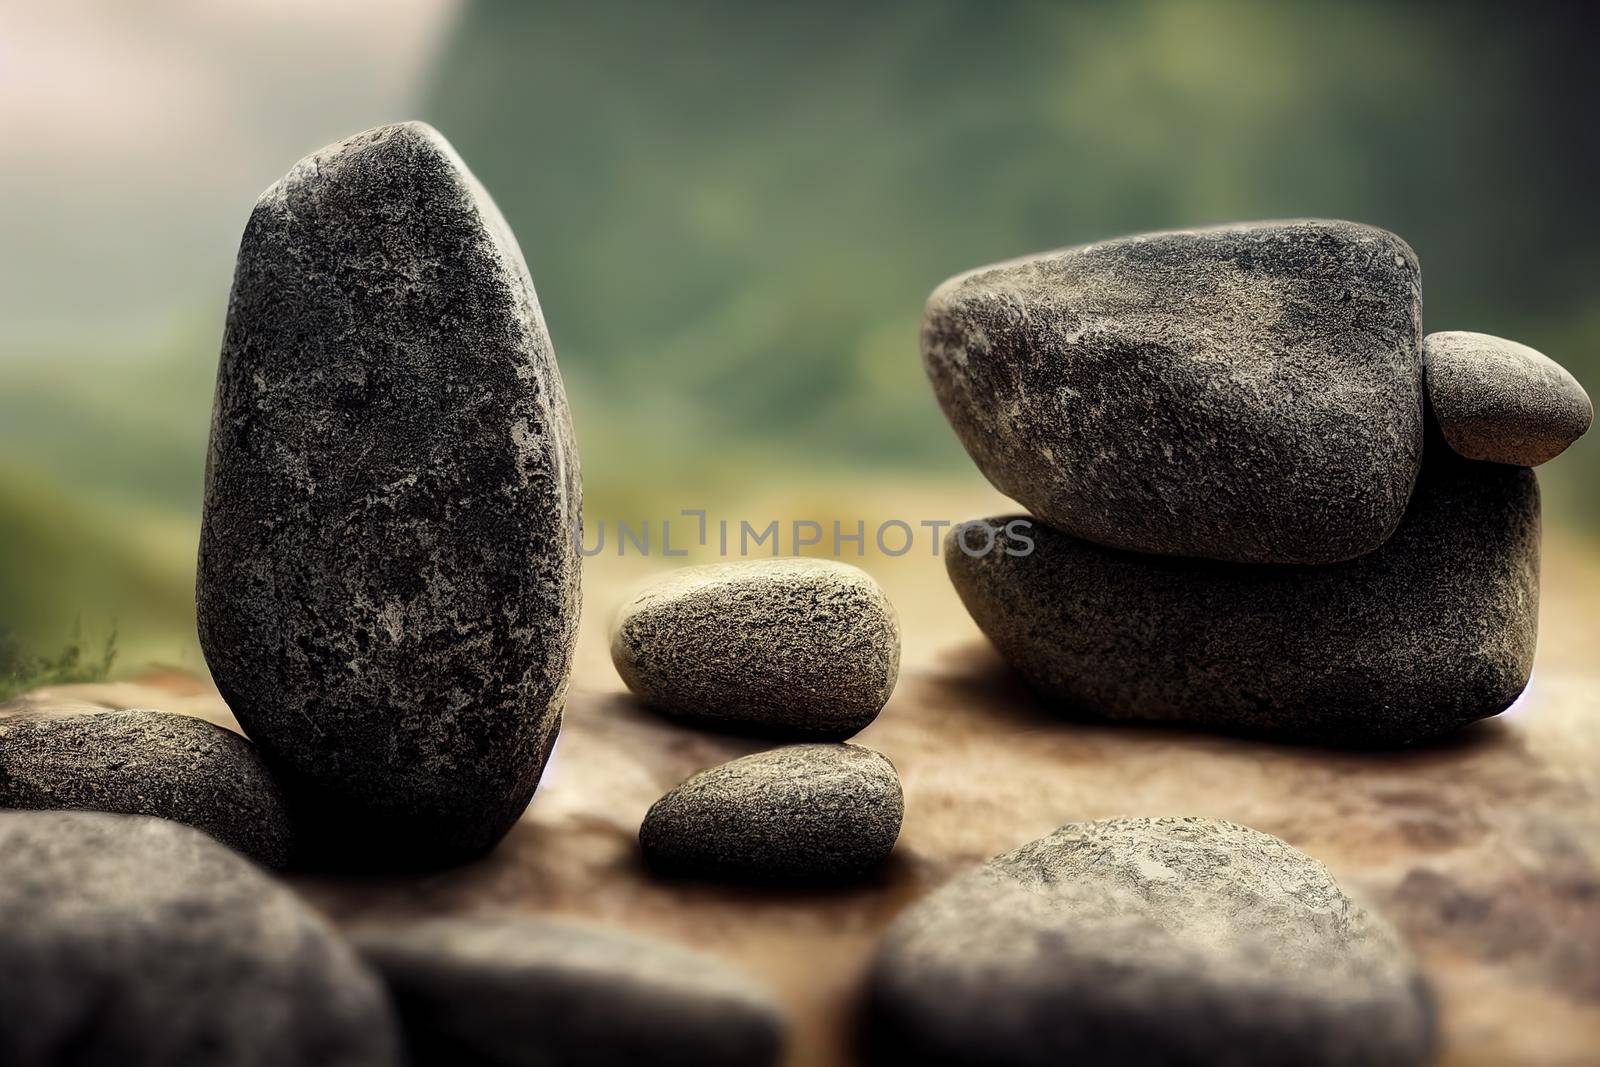 quotes of life let your determination exceed the Hardness of stone, with blurred rock nature background.